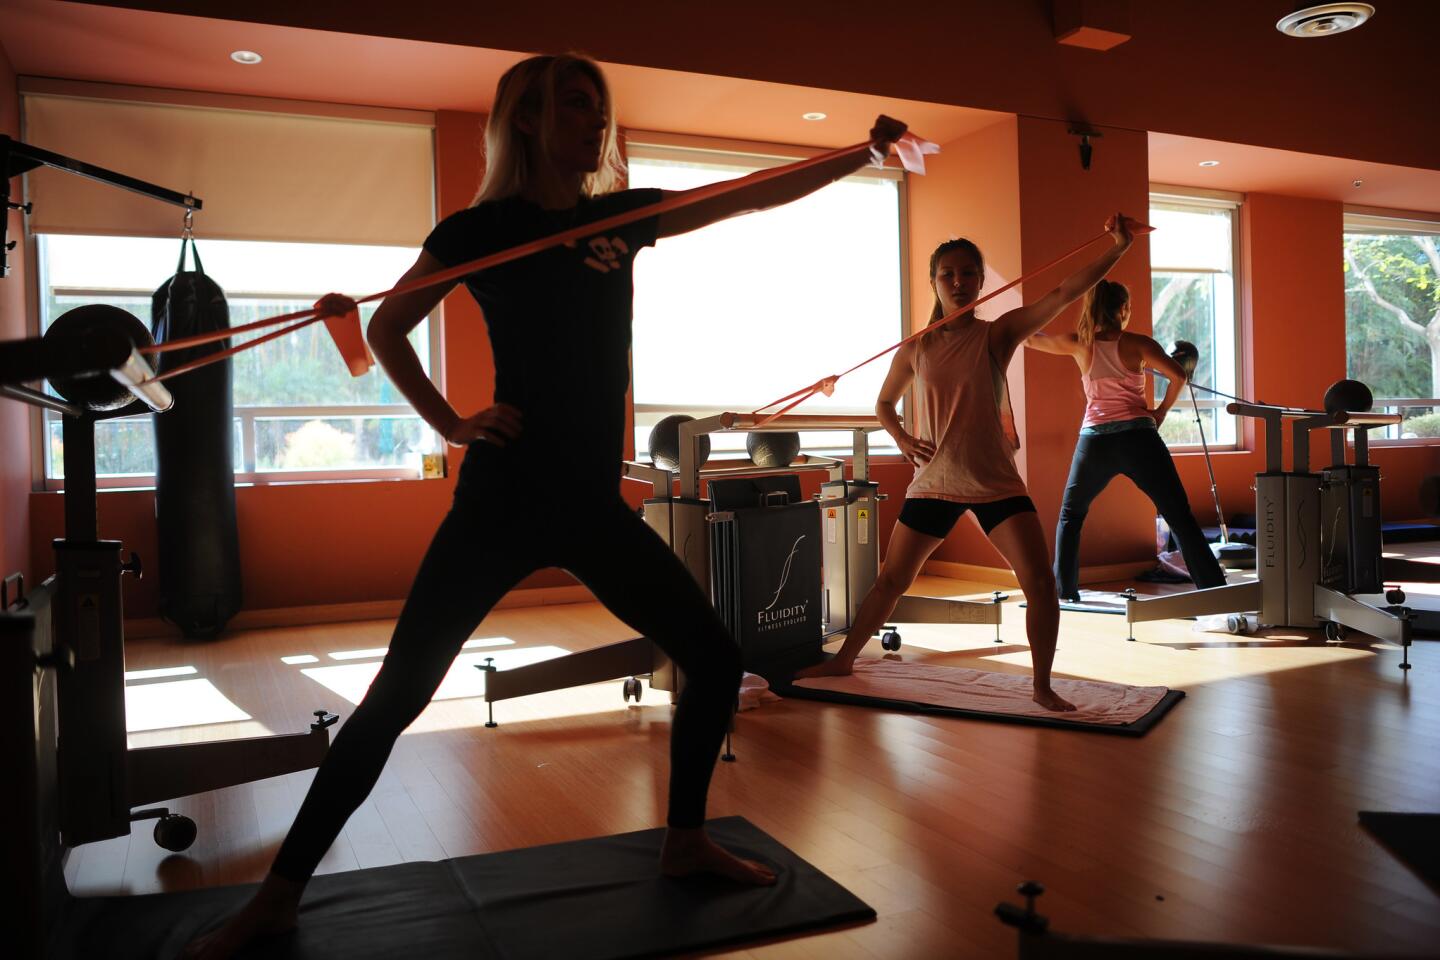 Fluidity barre classes are a breeze — for 10 seconds - Los